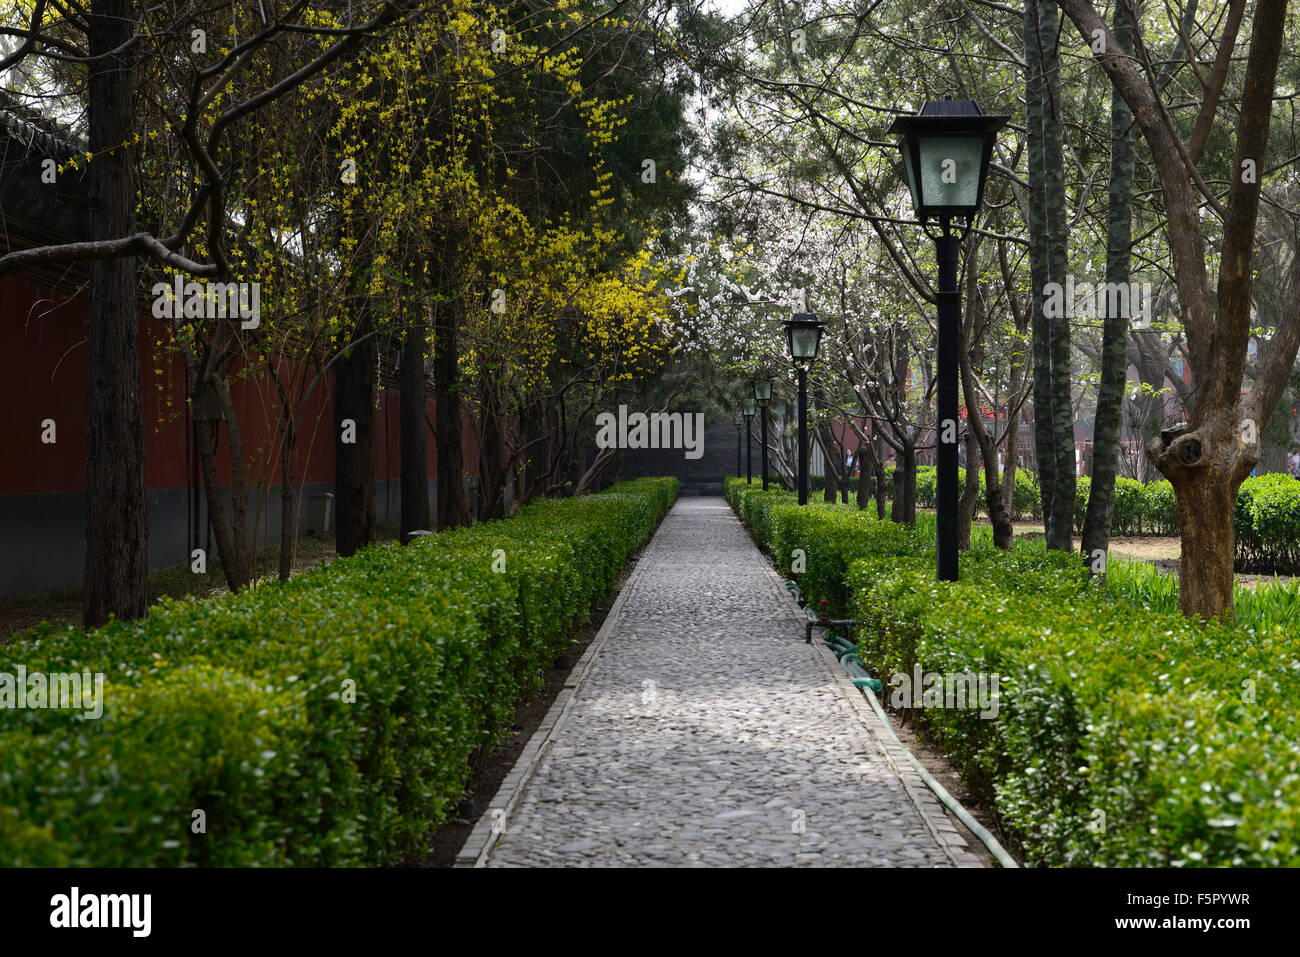 Tree lined pathway spring Cherry blossom Forsythia white yellow flowers flower blossom bloom Yonghe Lamasery Beijing RM Floral Stock Photo